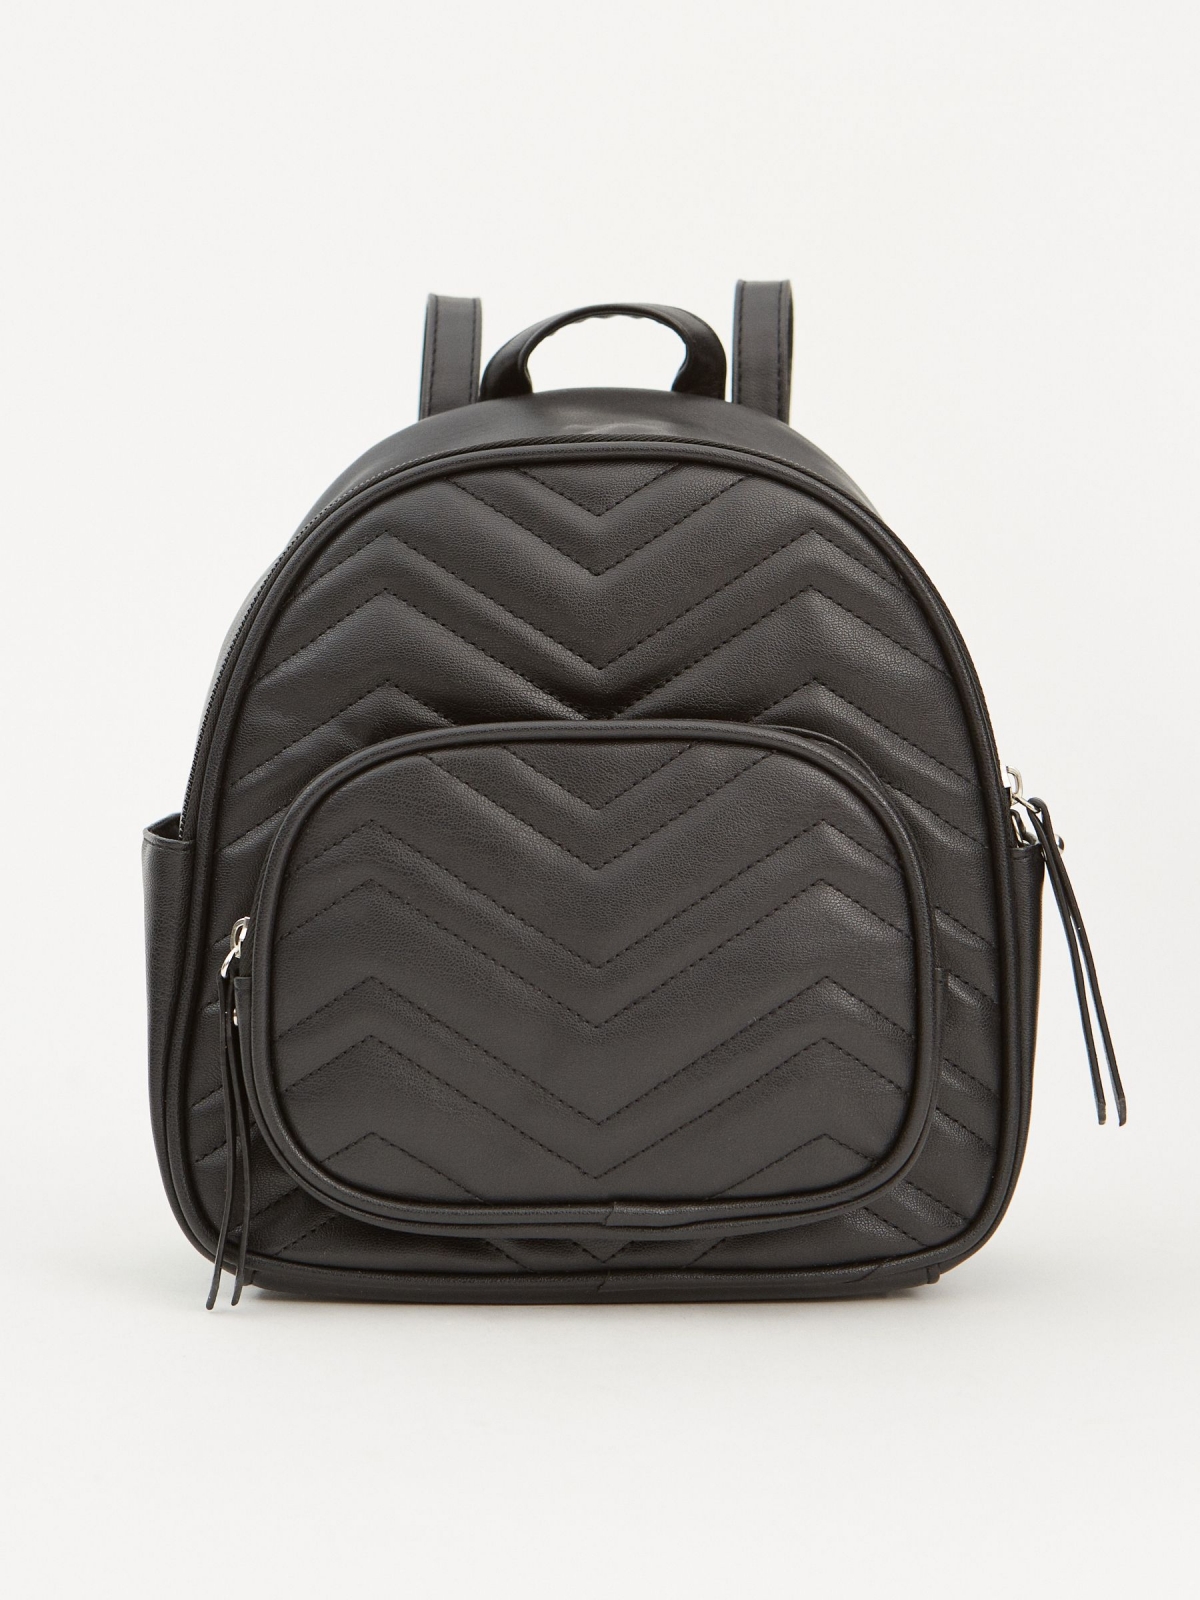 Quilted leather effect backpack black